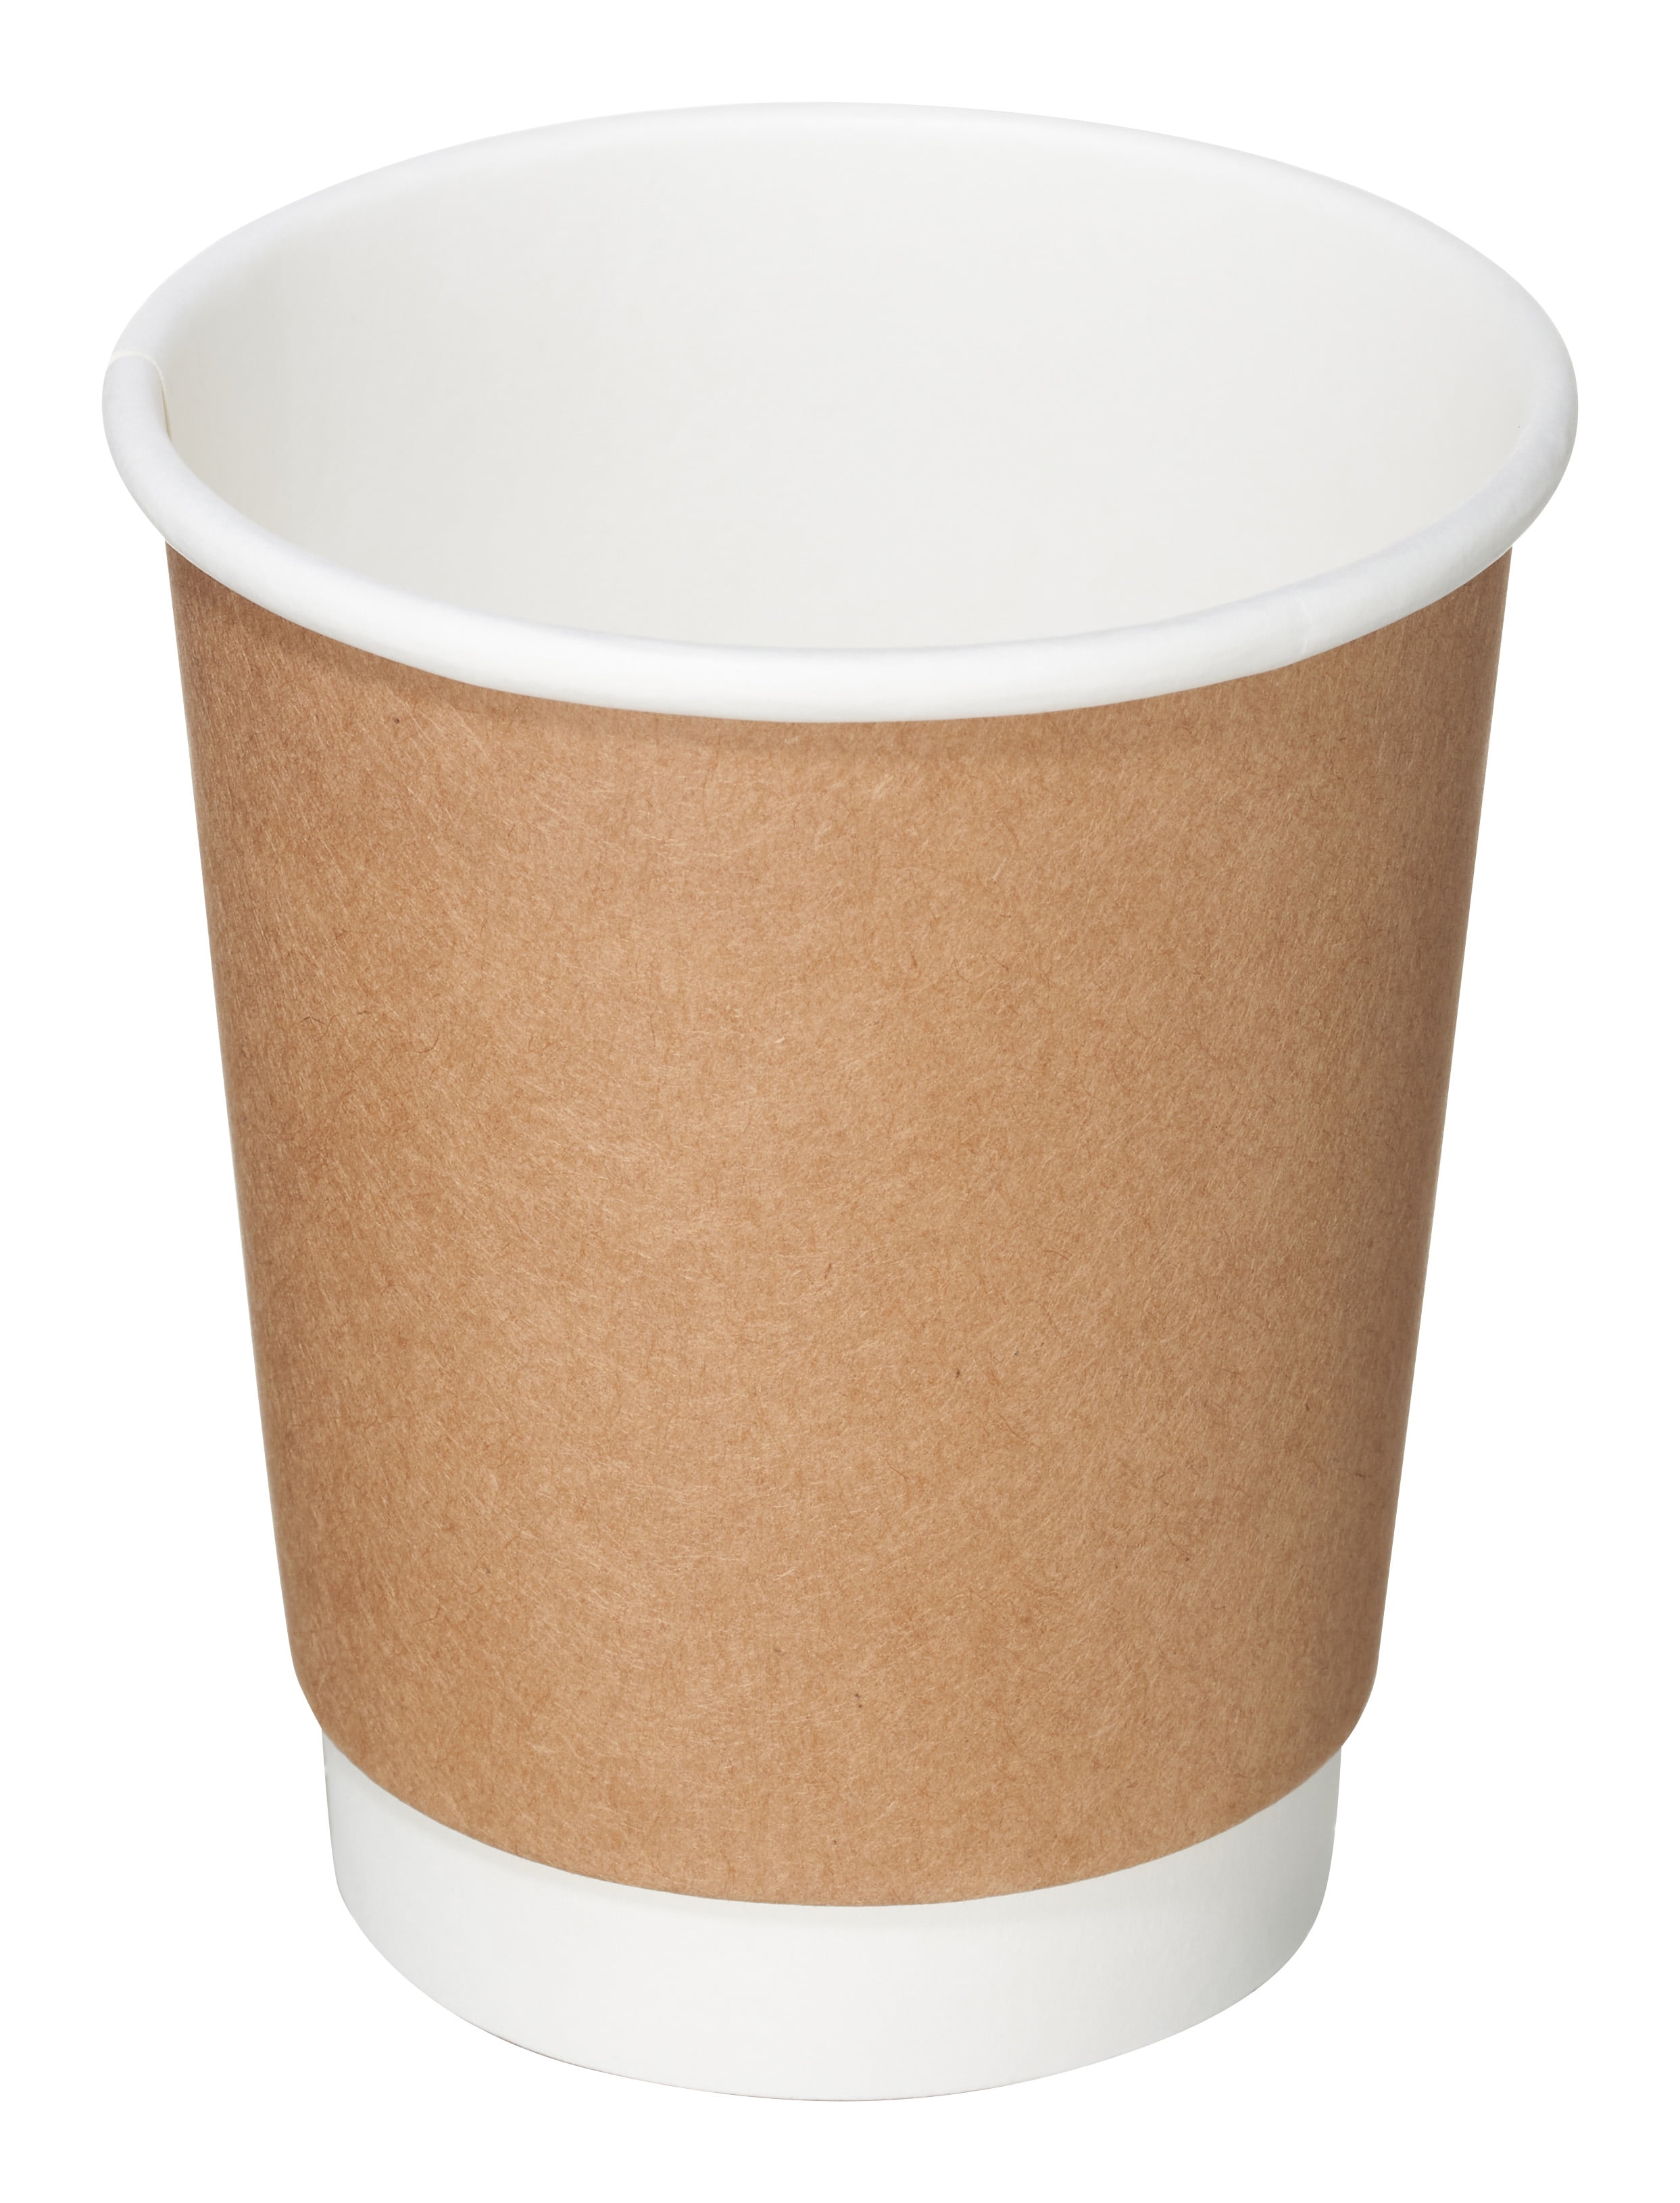 8 oz Disposable Insulated Paper Coffee Cups with Lids 100 COUNT 